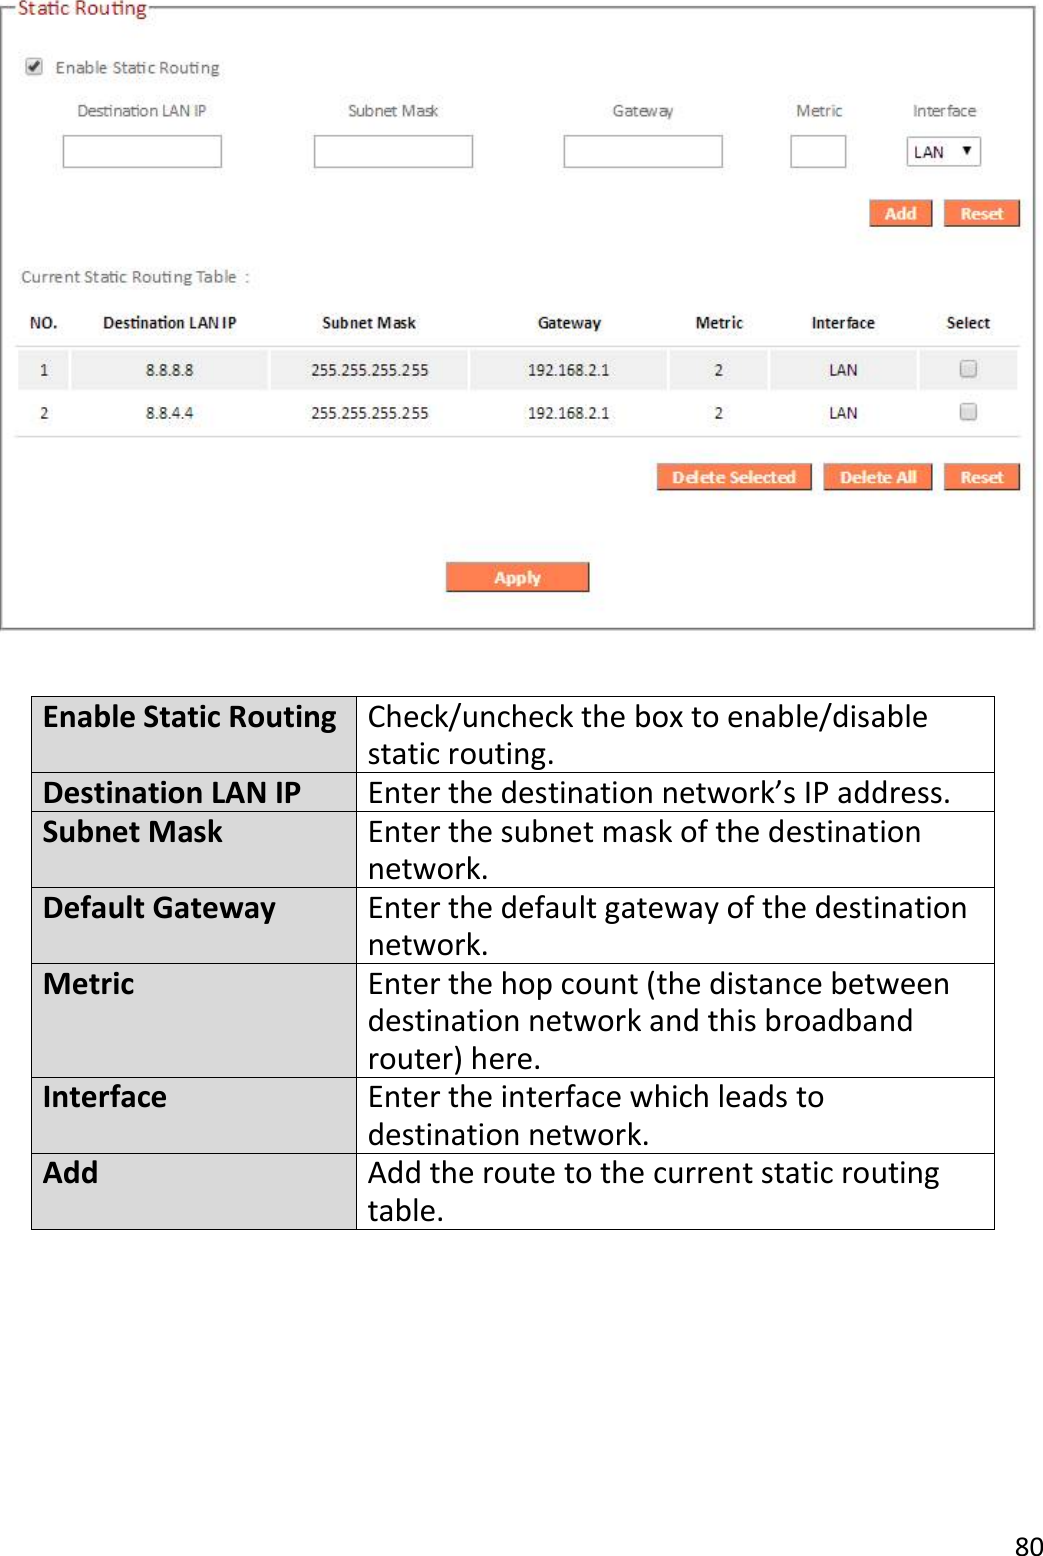 80    Enable Static Routing Check/uncheck the box to enable/disable static routing. Destination LAN IP Enter the destination network’s IP address. Subnet Mask Enter the subnet mask of the destination network. Default Gateway Enter the default gateway of the destination network. Metric Enter the hop count (the distance between destination network and this broadband router) here. Interface Enter the interface which leads to destination network. Add Add the route to the current static routing table.   